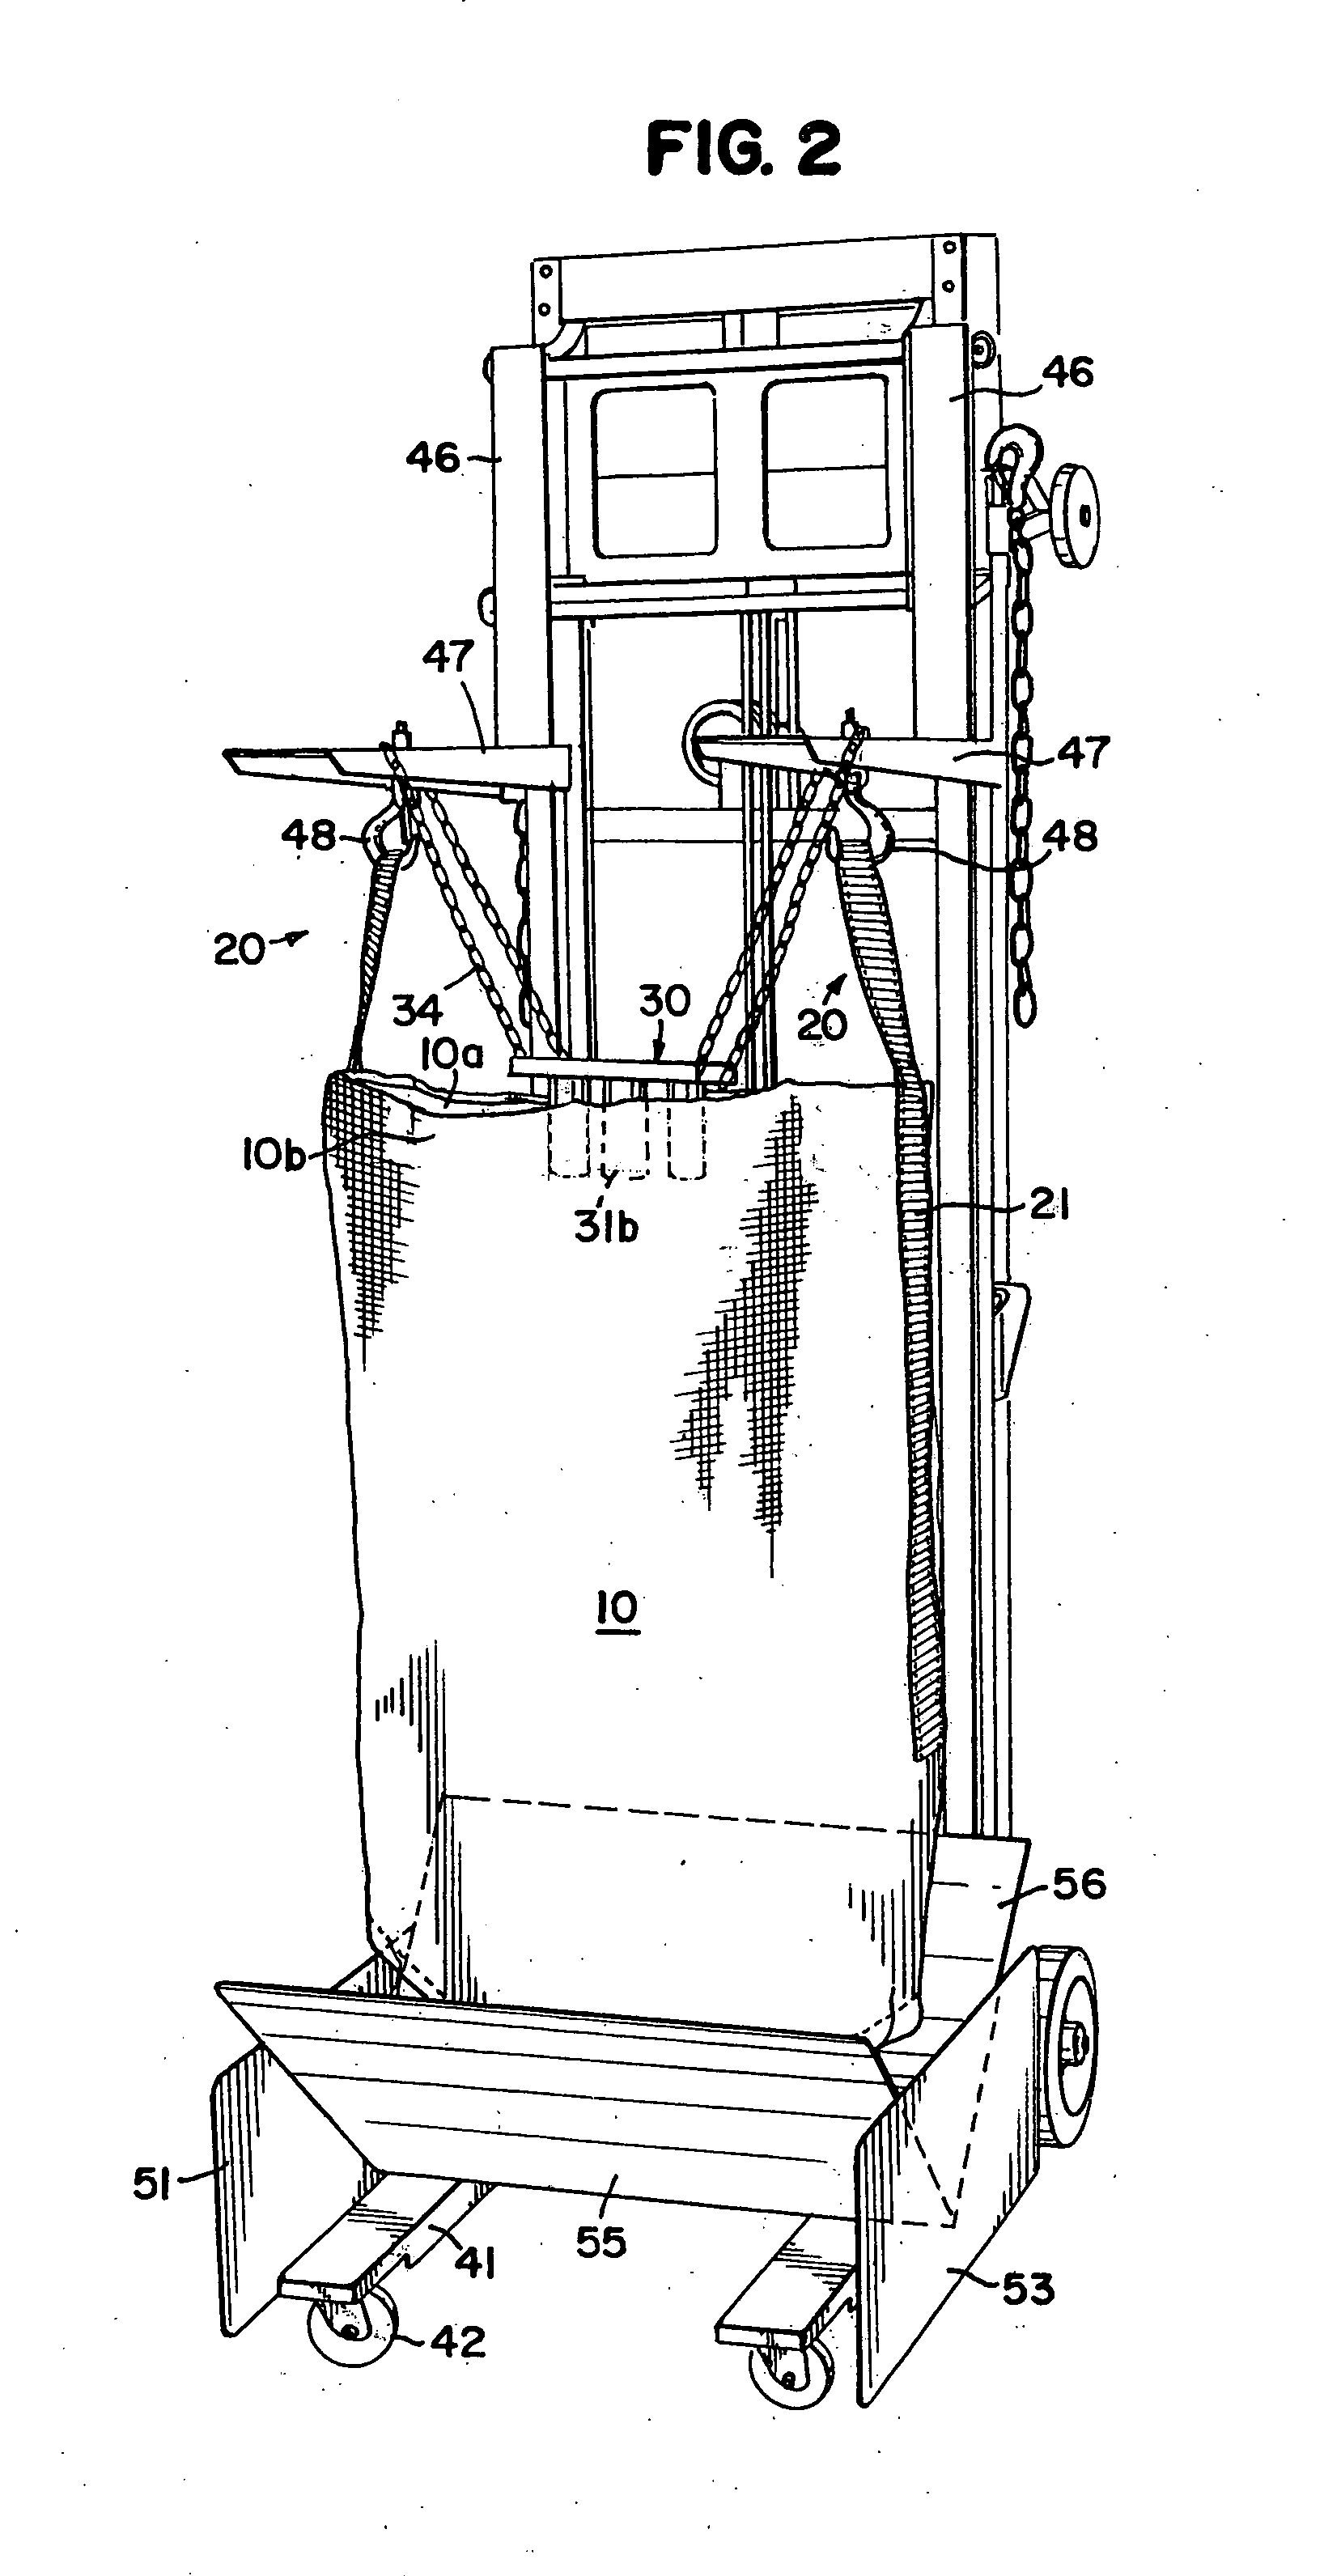 Method and apparatus for powder delivery system